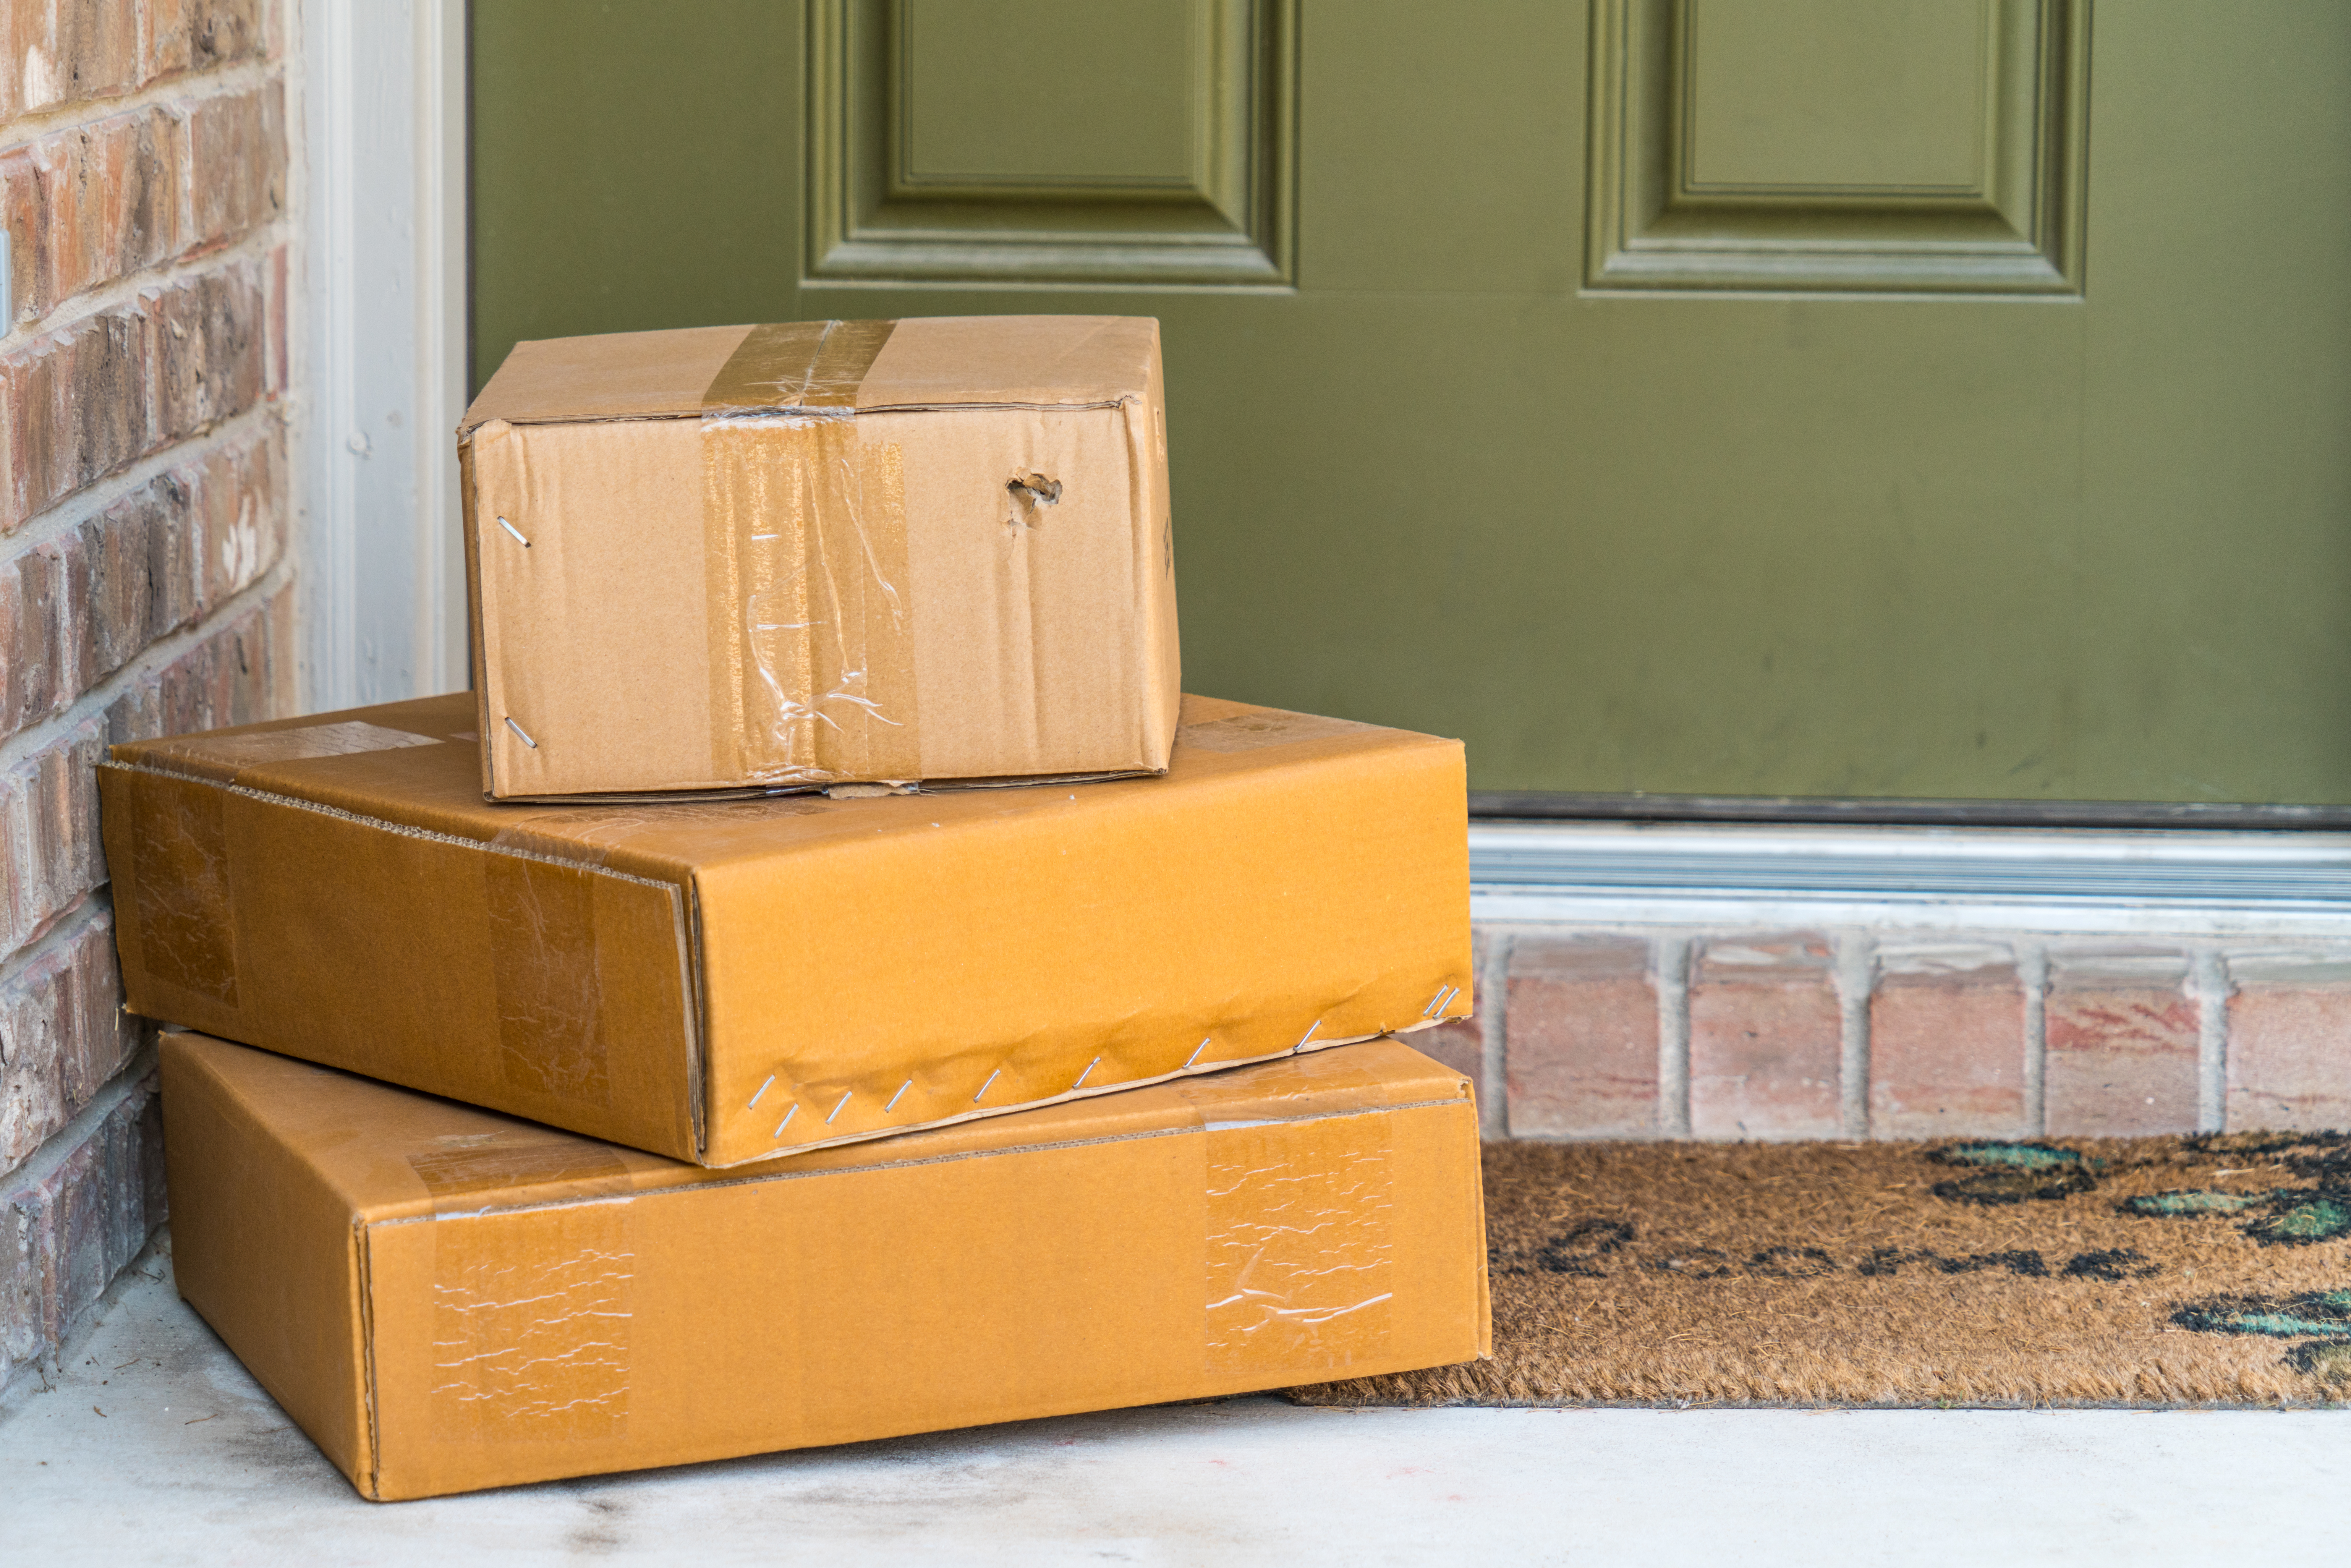 Package,Delivery,On,Doorstep.,Boxes,And,Postal,Delivery,On,Modern